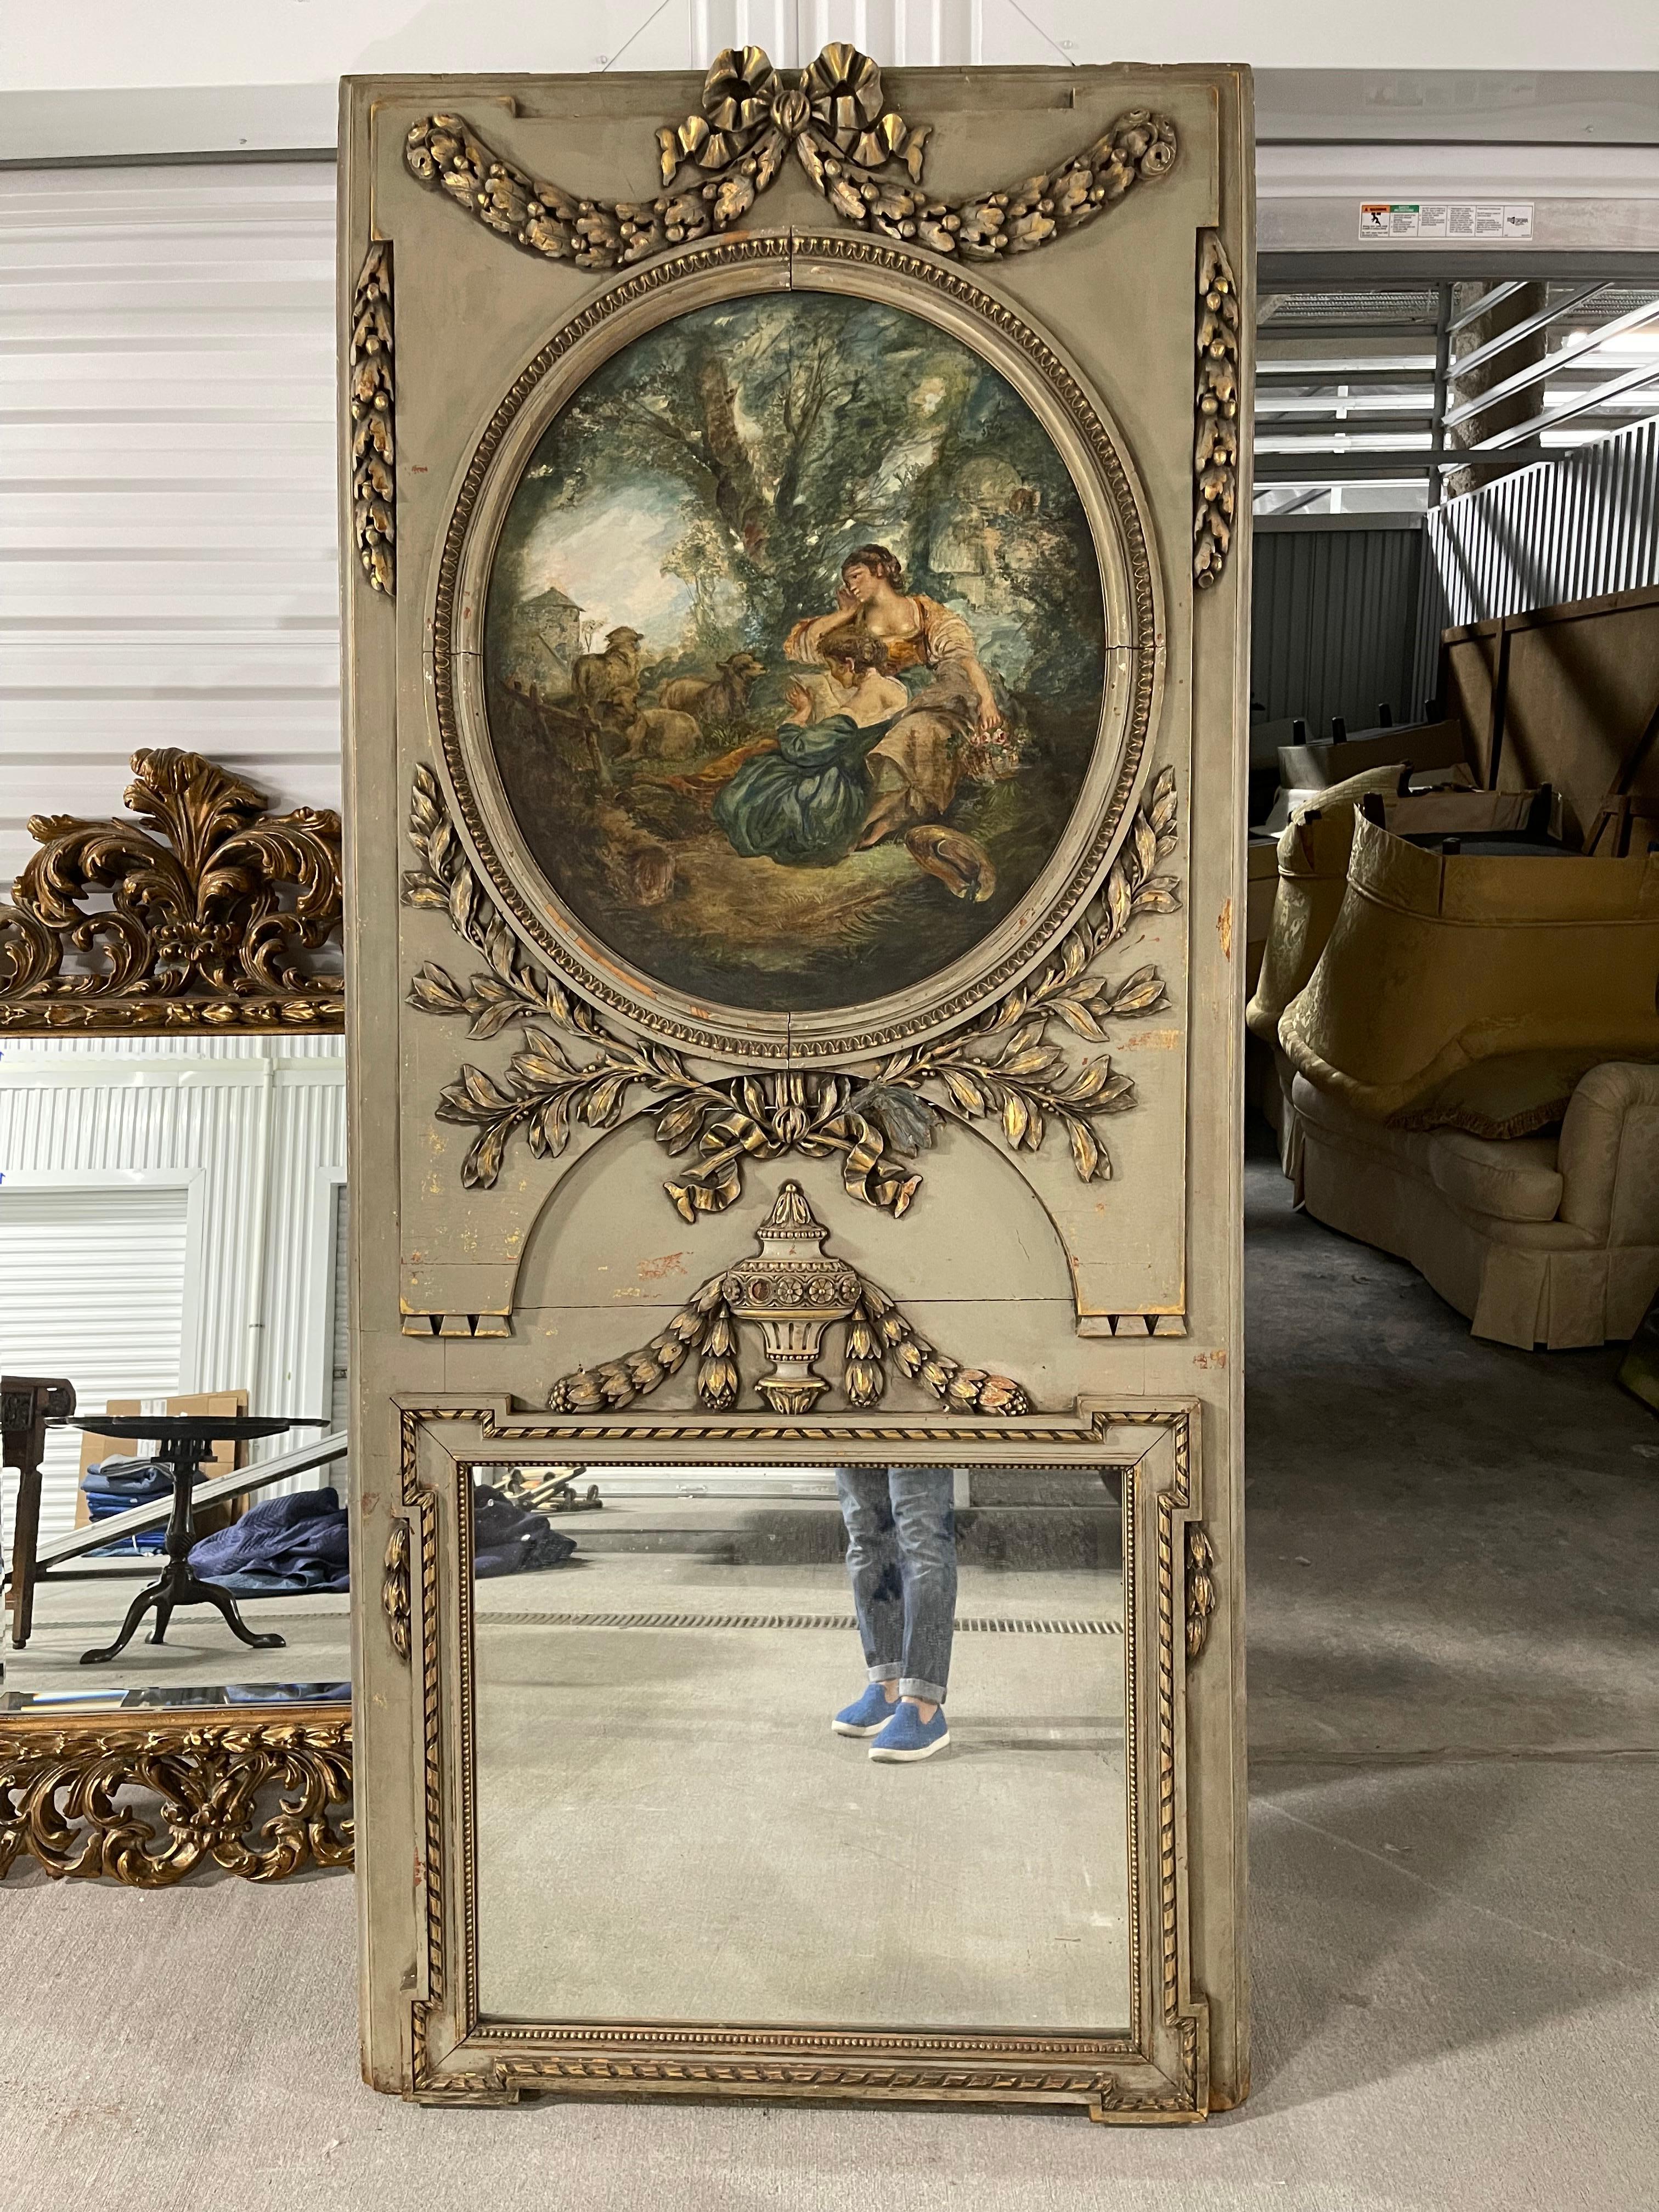 19th century French Trumeau green and gold mirror with a painted scene of ladies with and sheep. Original mercury mirror.